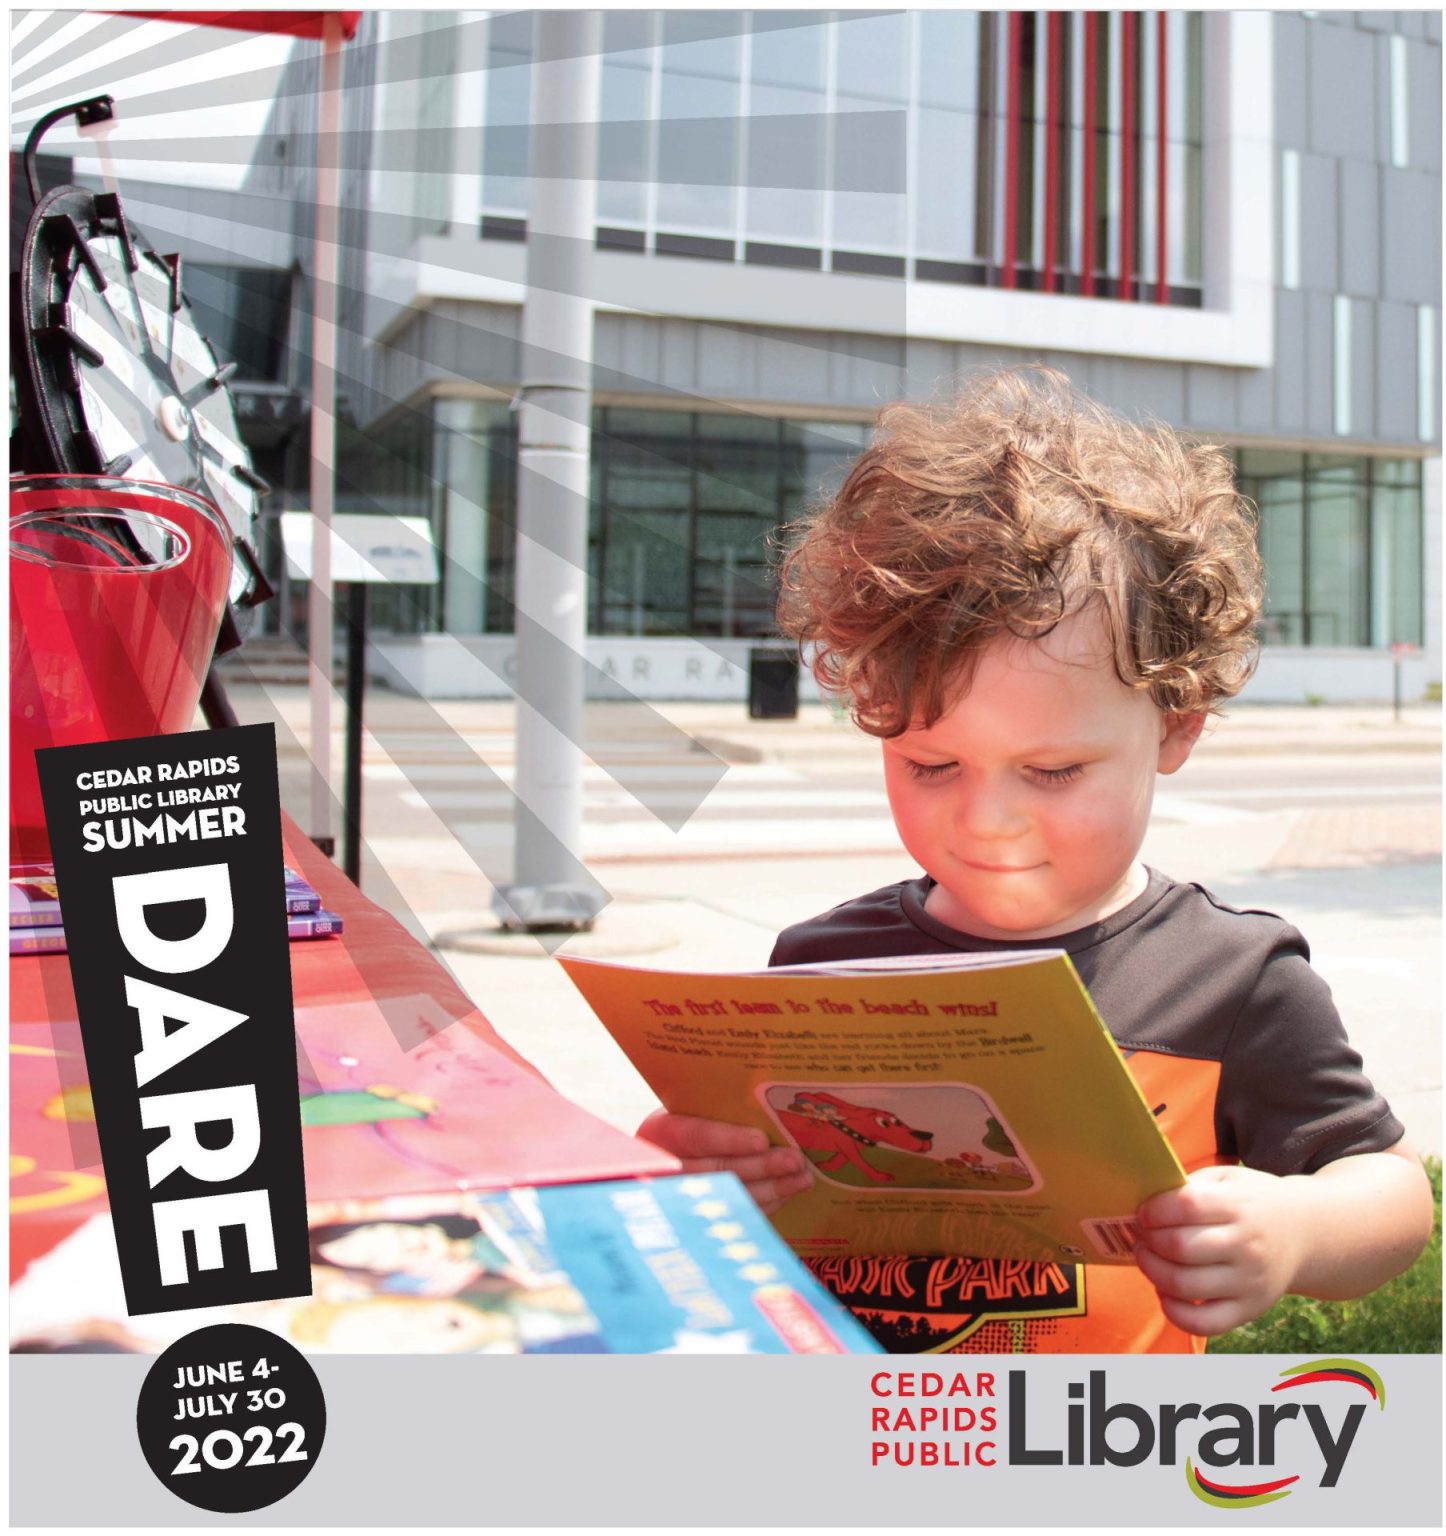 A boy with curly hair looks at a book next to an icon for Summer Dare 2022.